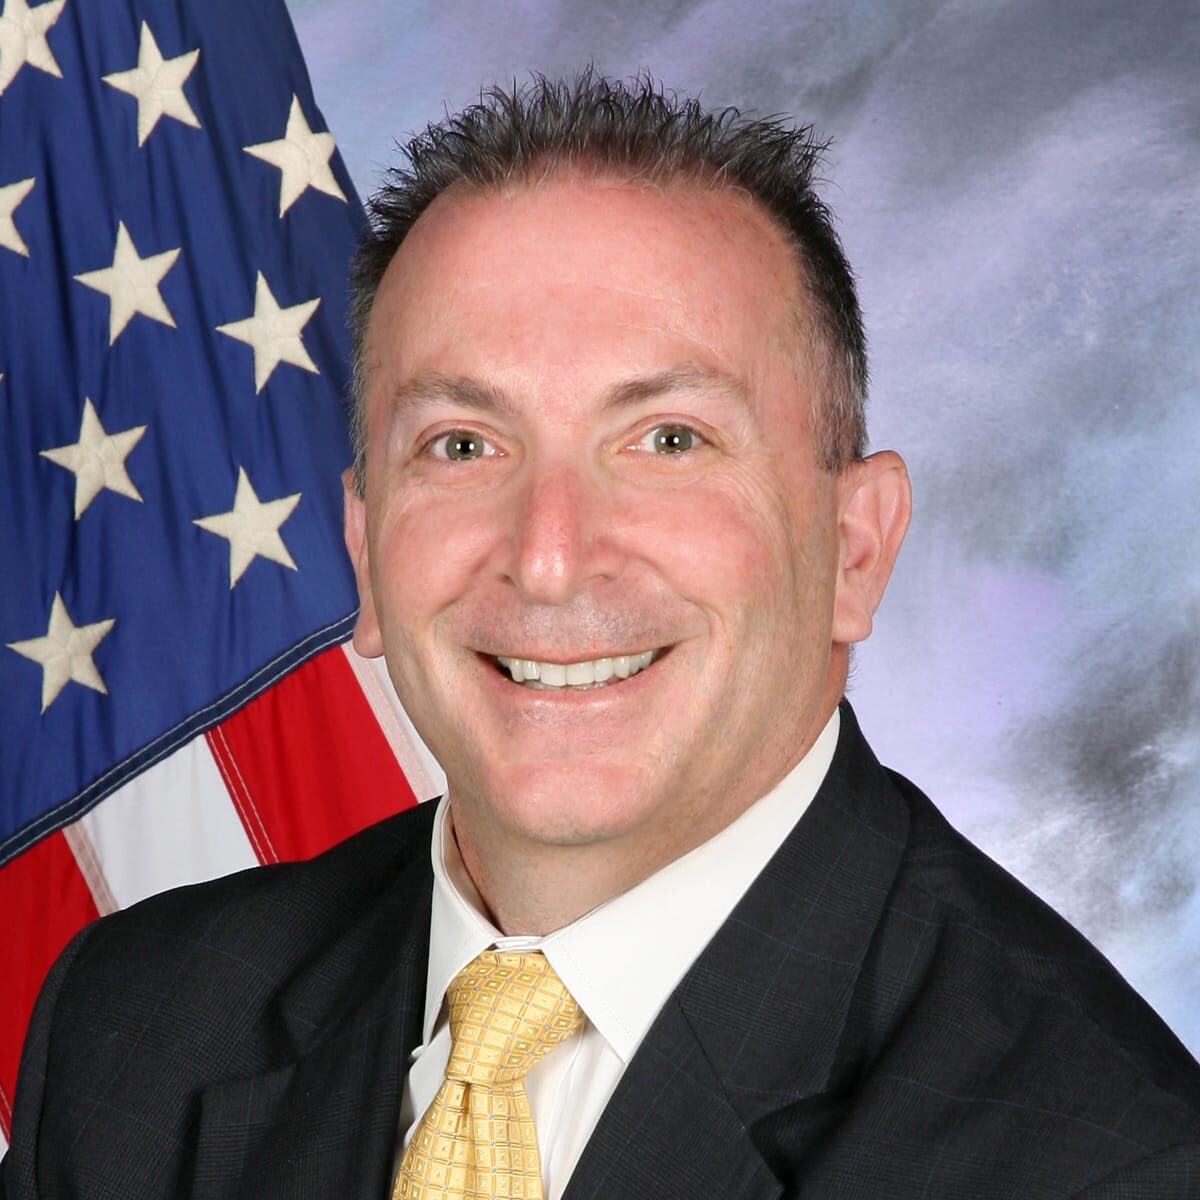 Support staff Richard Koplar, smiling man wearing suit with yellow tie in front of American flag